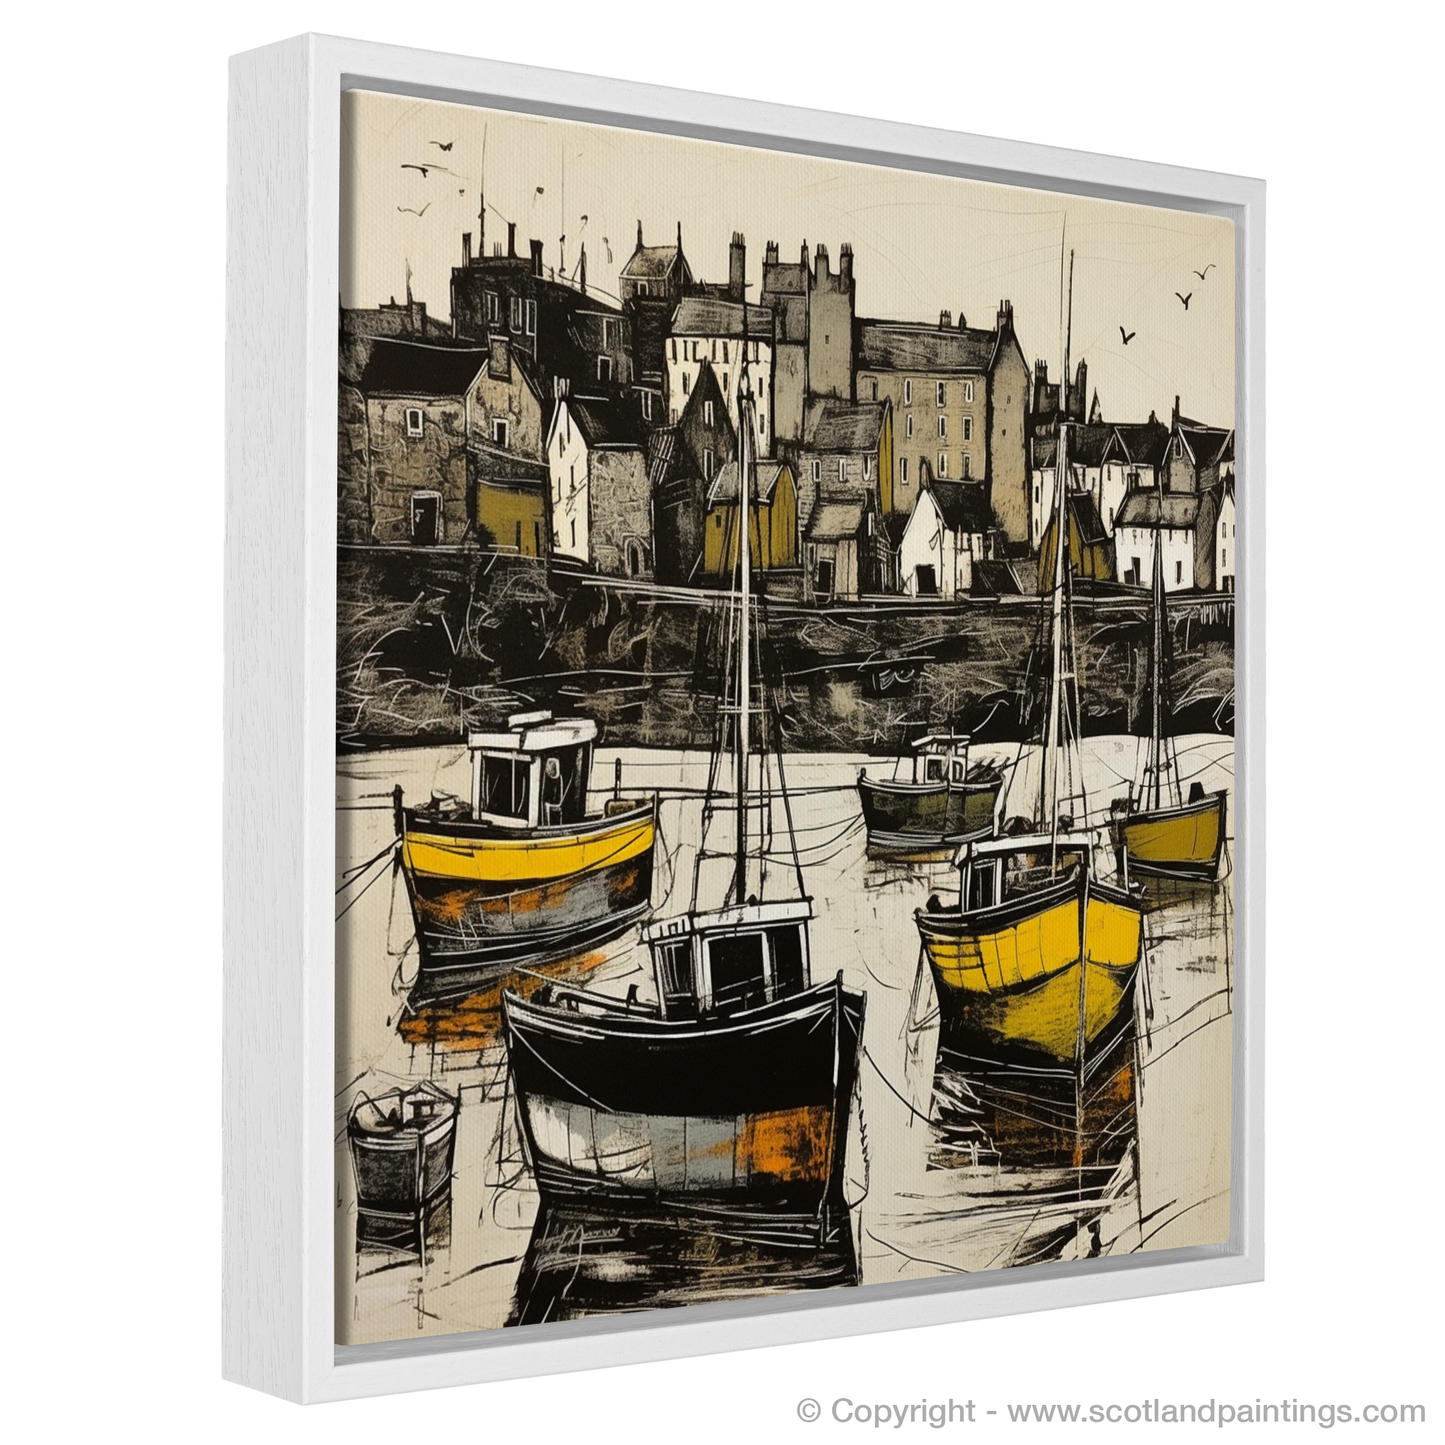 Painting and Art Print of Castlebay Harbour, Isle of Barra entitled "Harbour Dance: An Illustrative Expression of Castlebay, Isle of Barra".